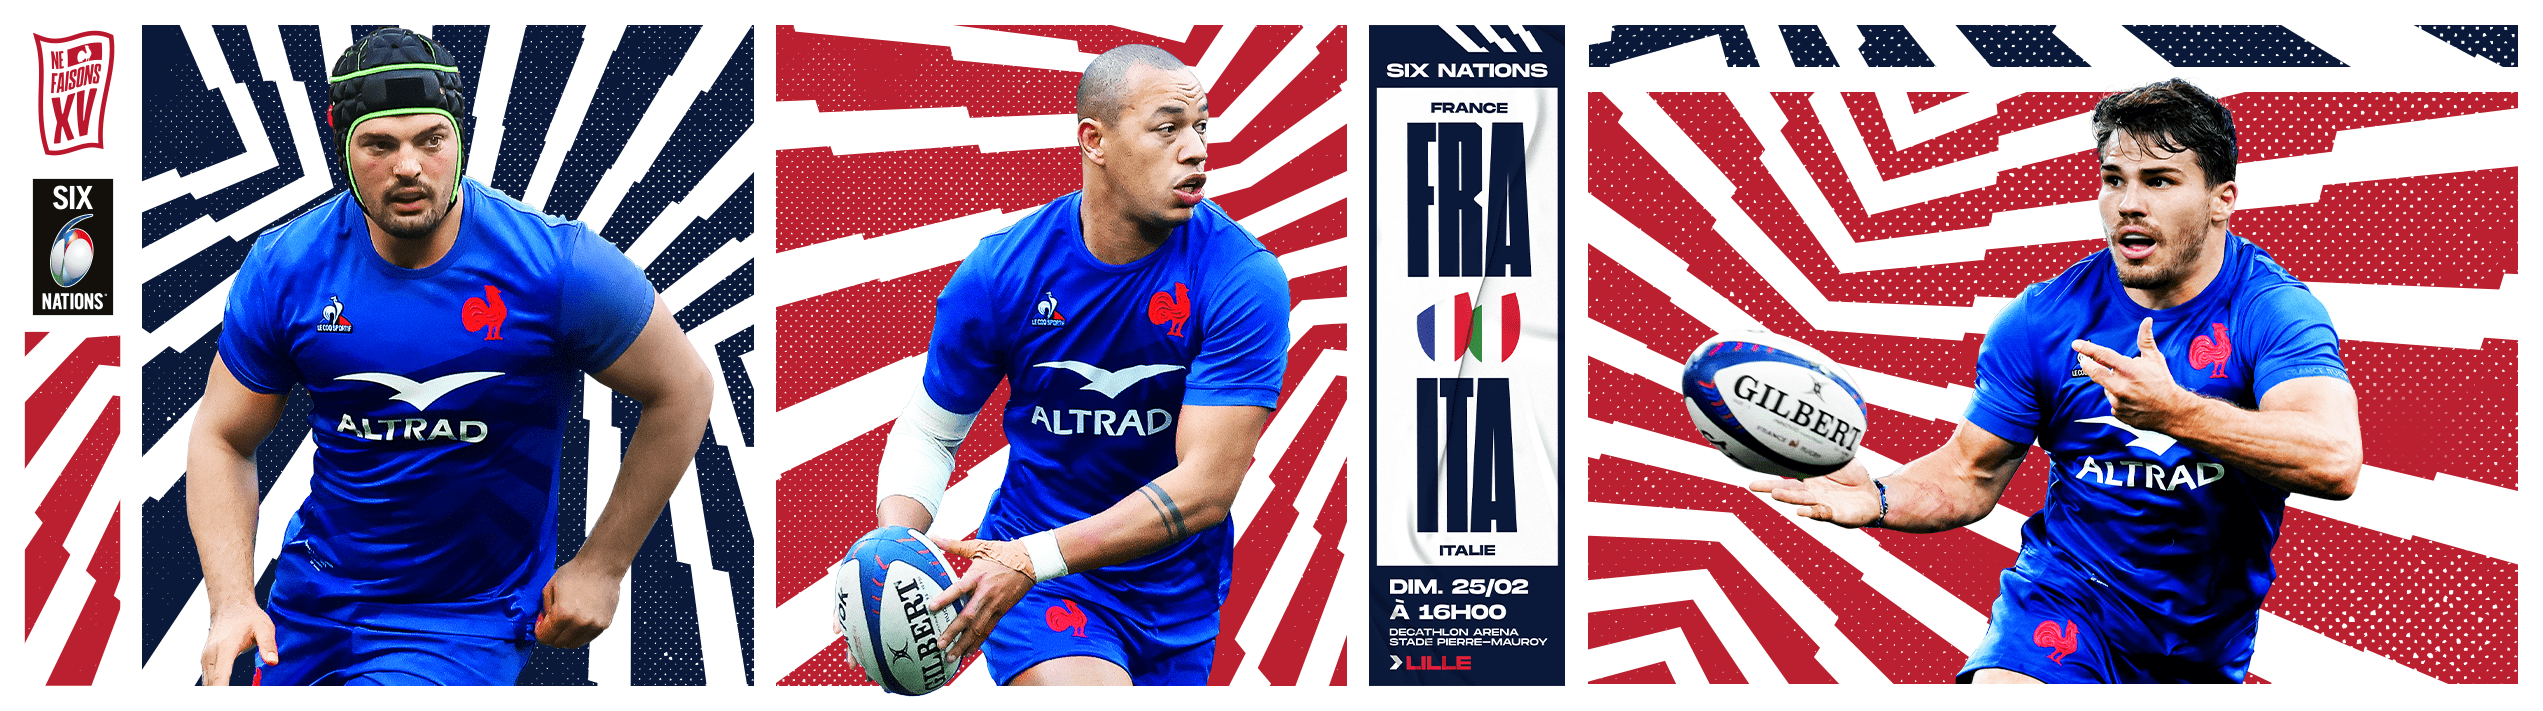 Sport - RUGBY : FRANCE / ITALIE